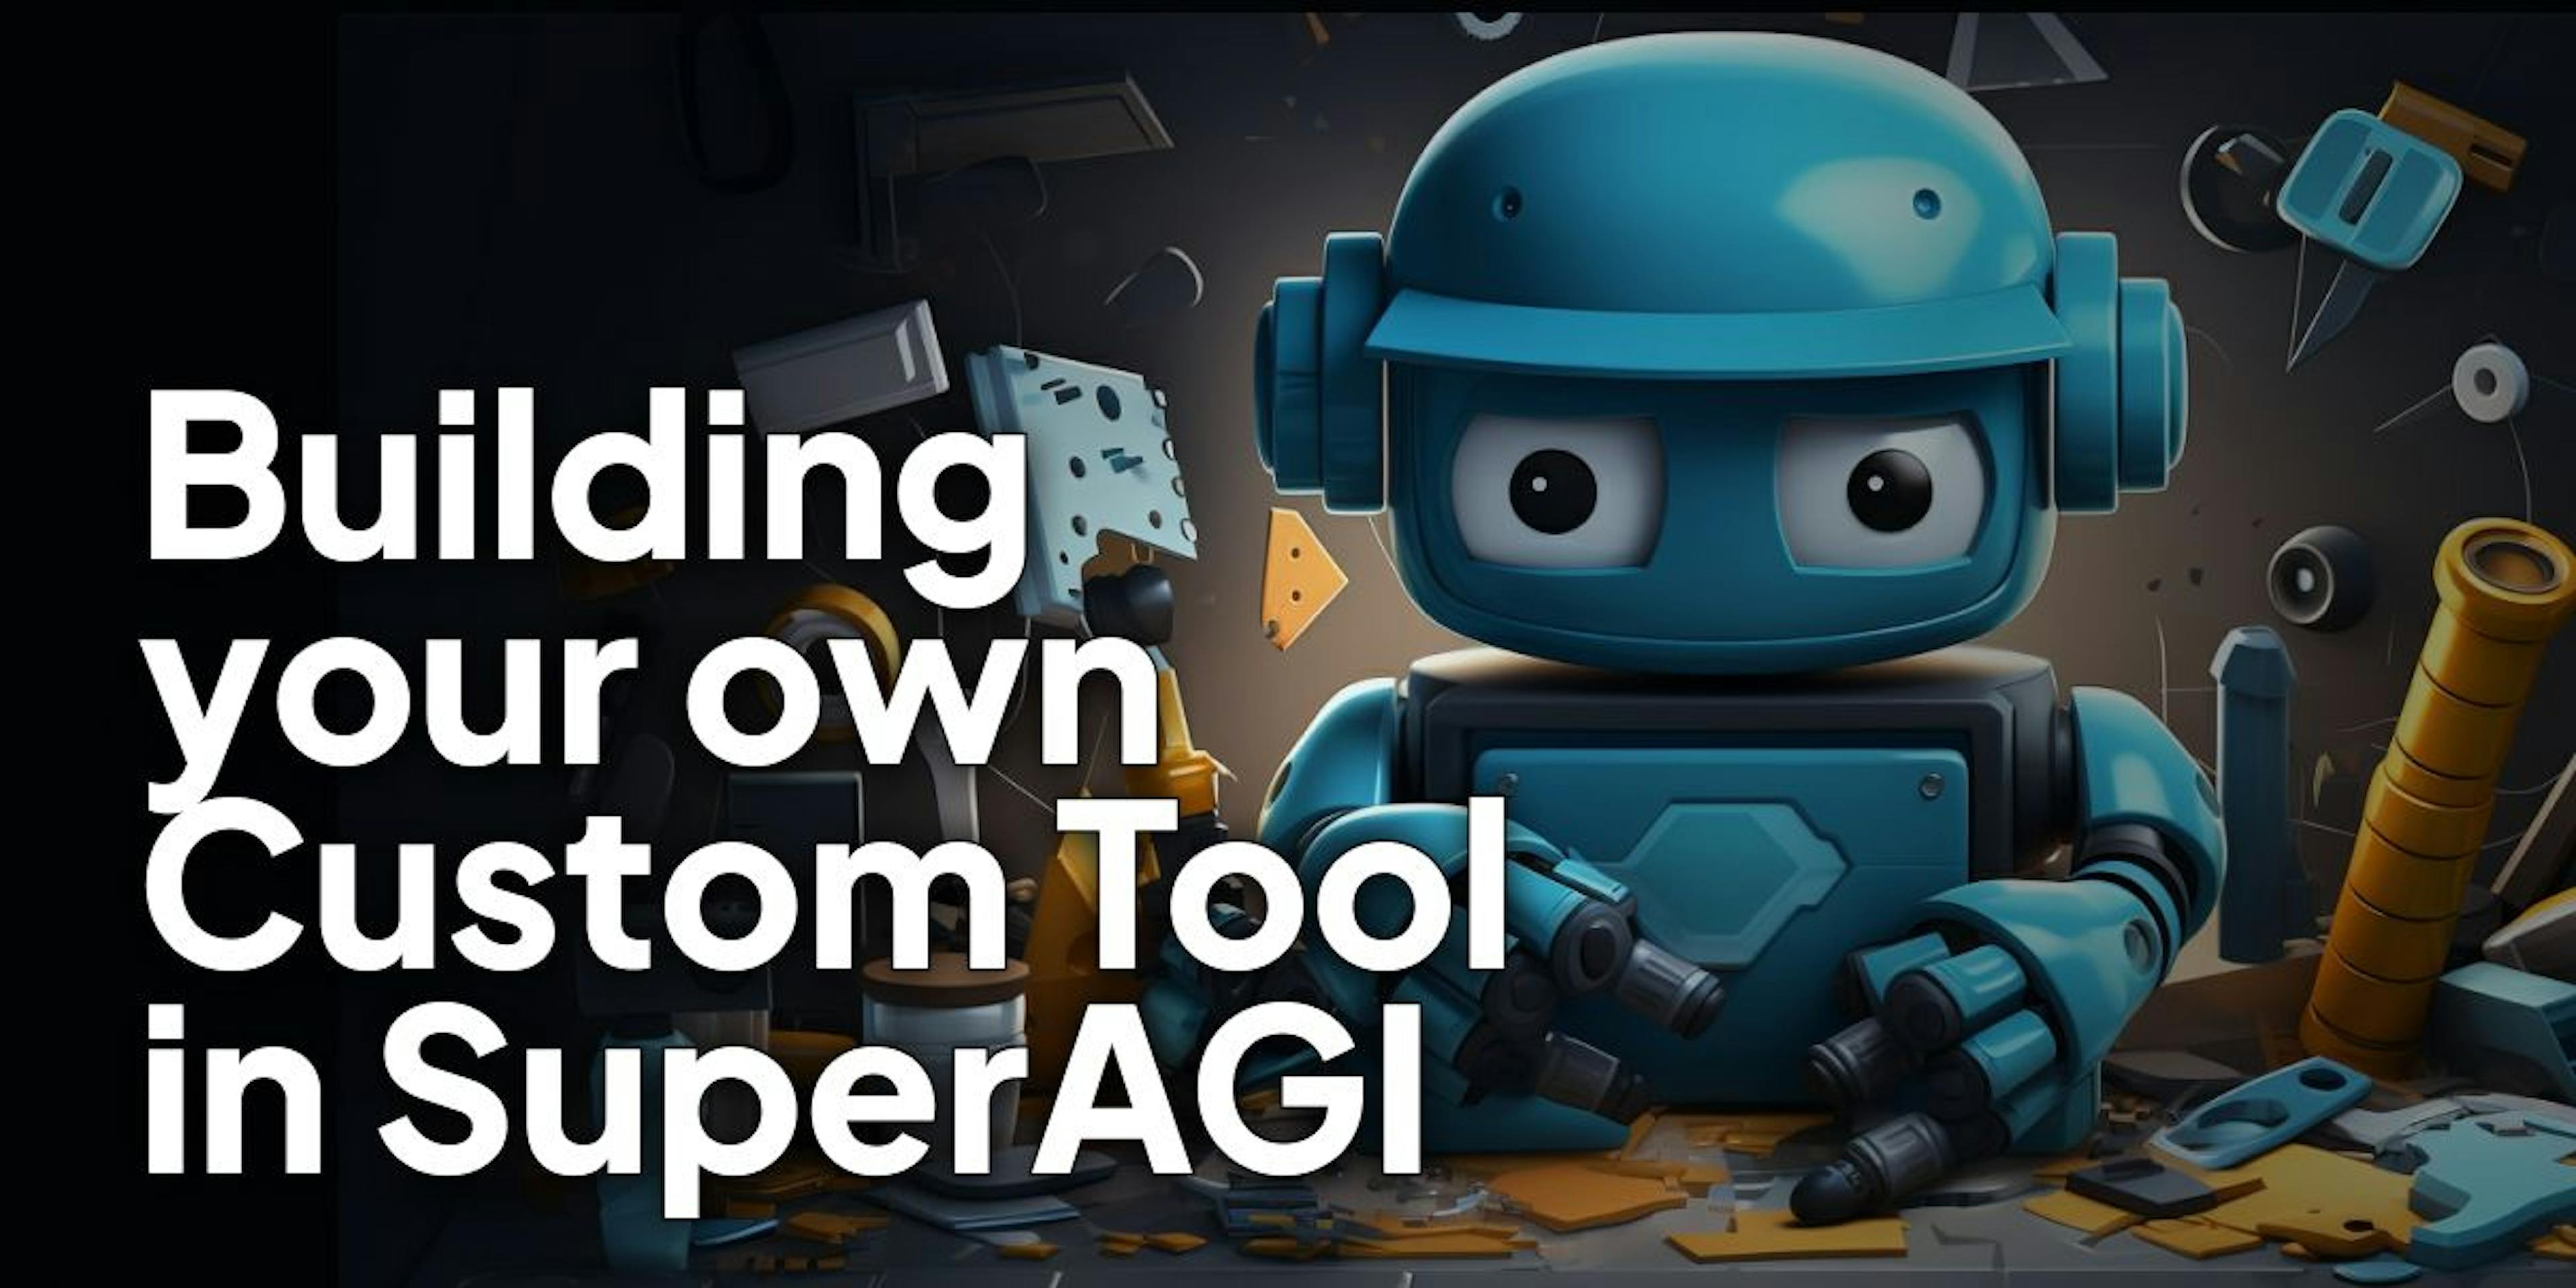 featured image - Building Your Own Custom Tool in SuperAGI: A Step-by-Step Guide